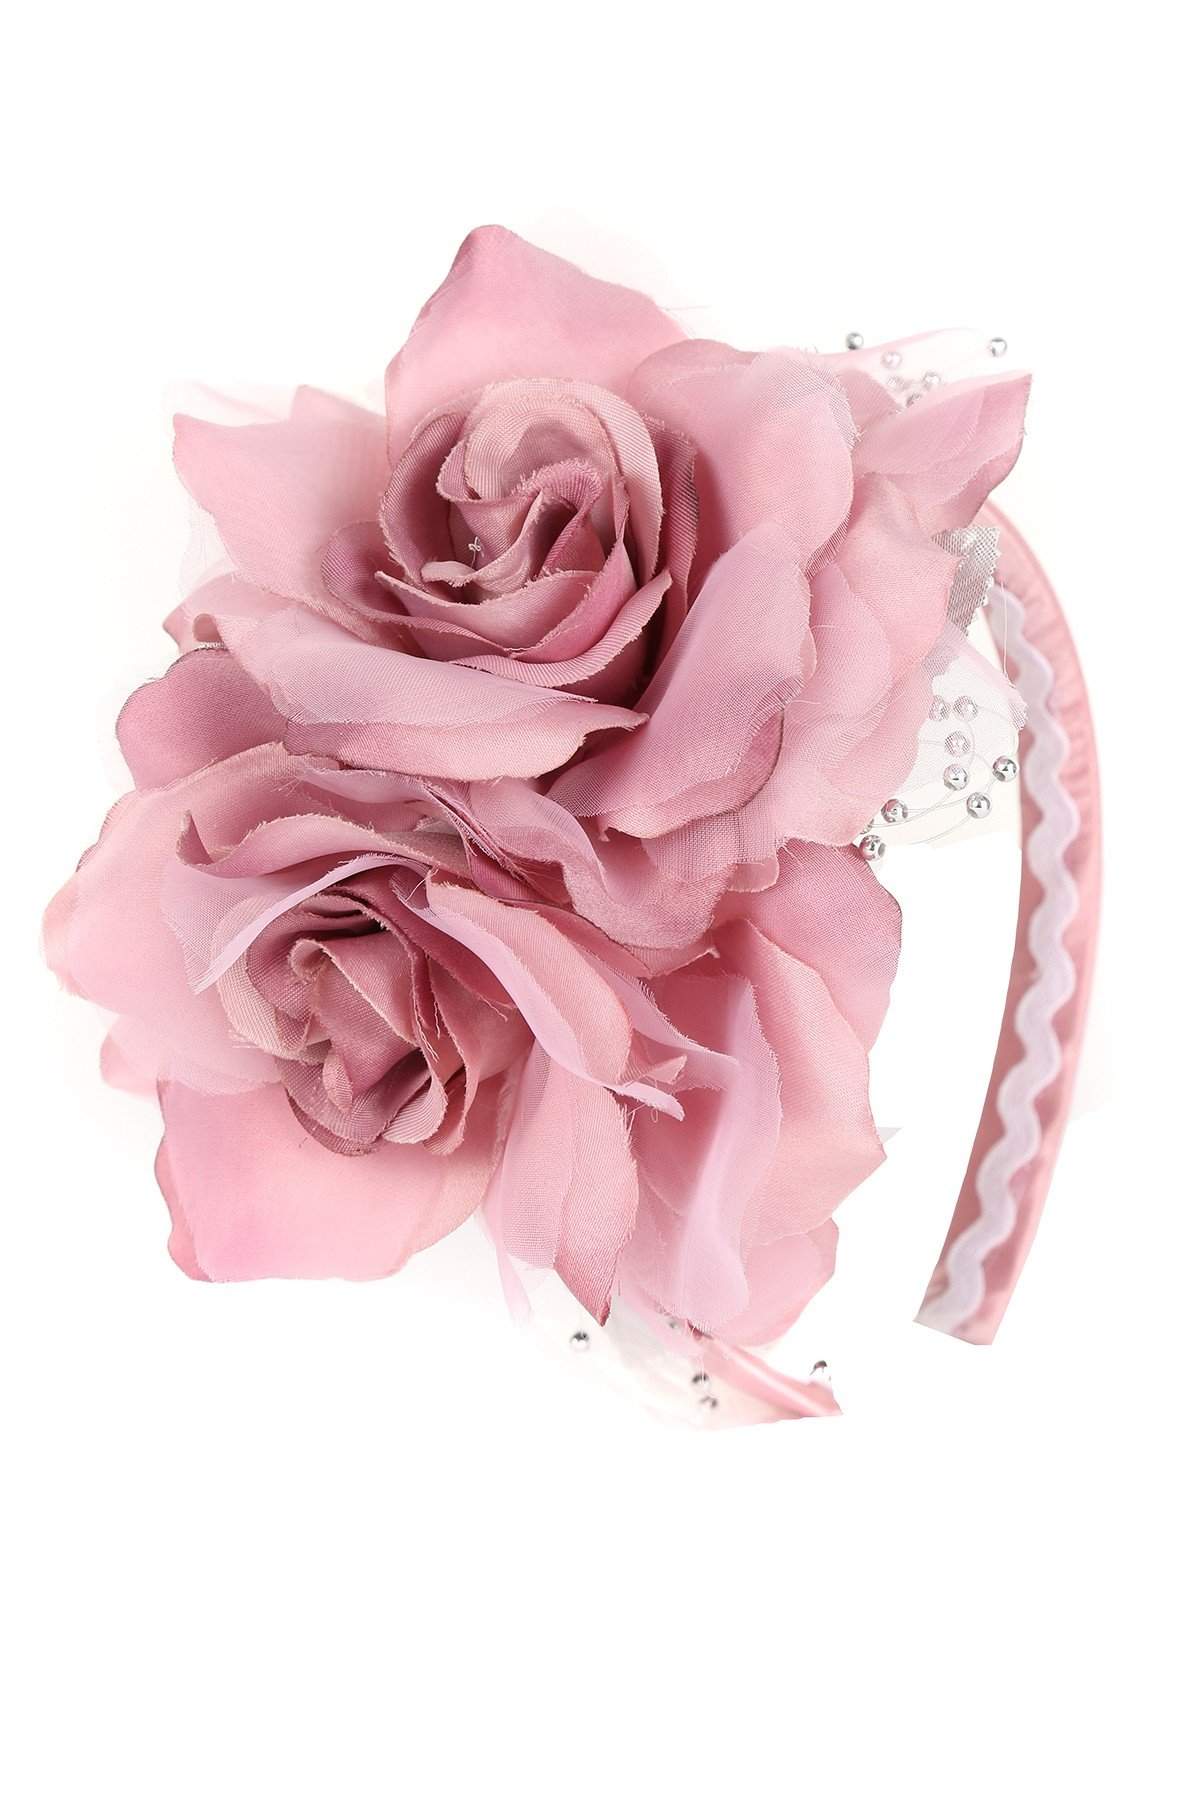 Large Flower Headband-Kid's Dream-1_2,3_4,5_6,7_8,big_girl,color_White,fabric_Satin,little_girl,size_02,size_04,size_06,size_08,size_10,size_12,size_14